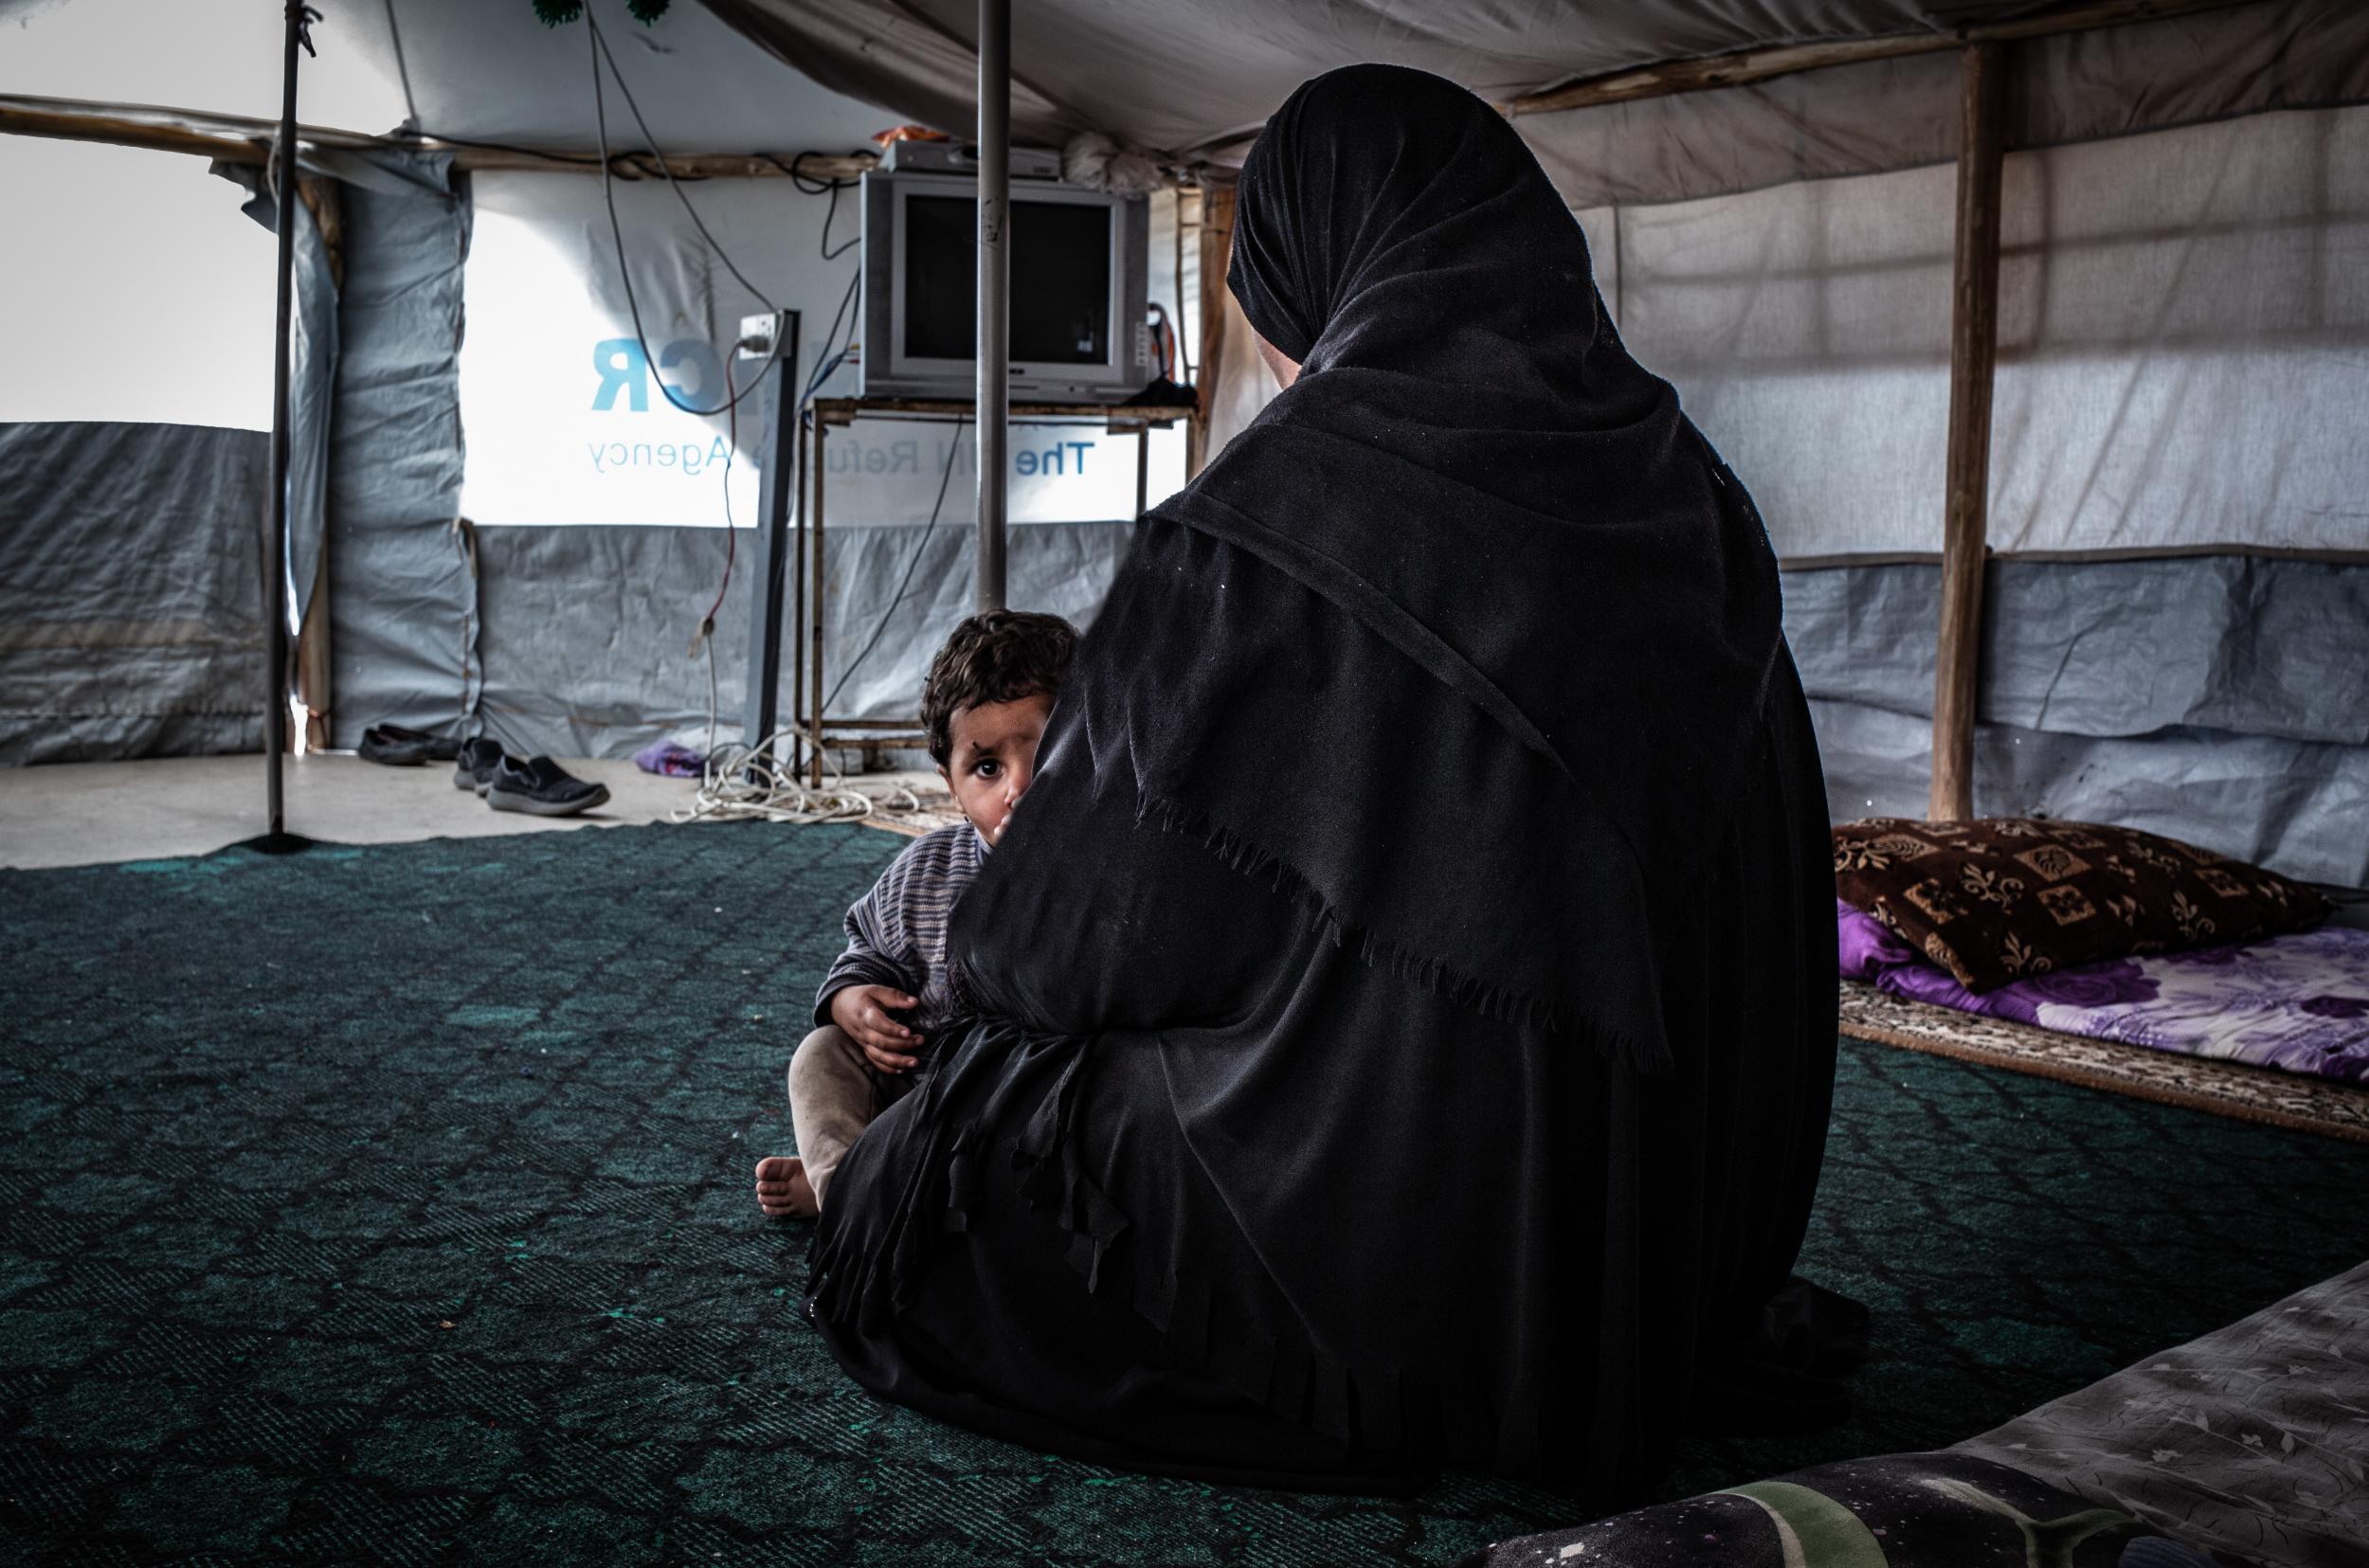 Hana, a mother of seven children, fled Hawija in 2017 as the Iraqi government retook the city; some of her children have no identity documents